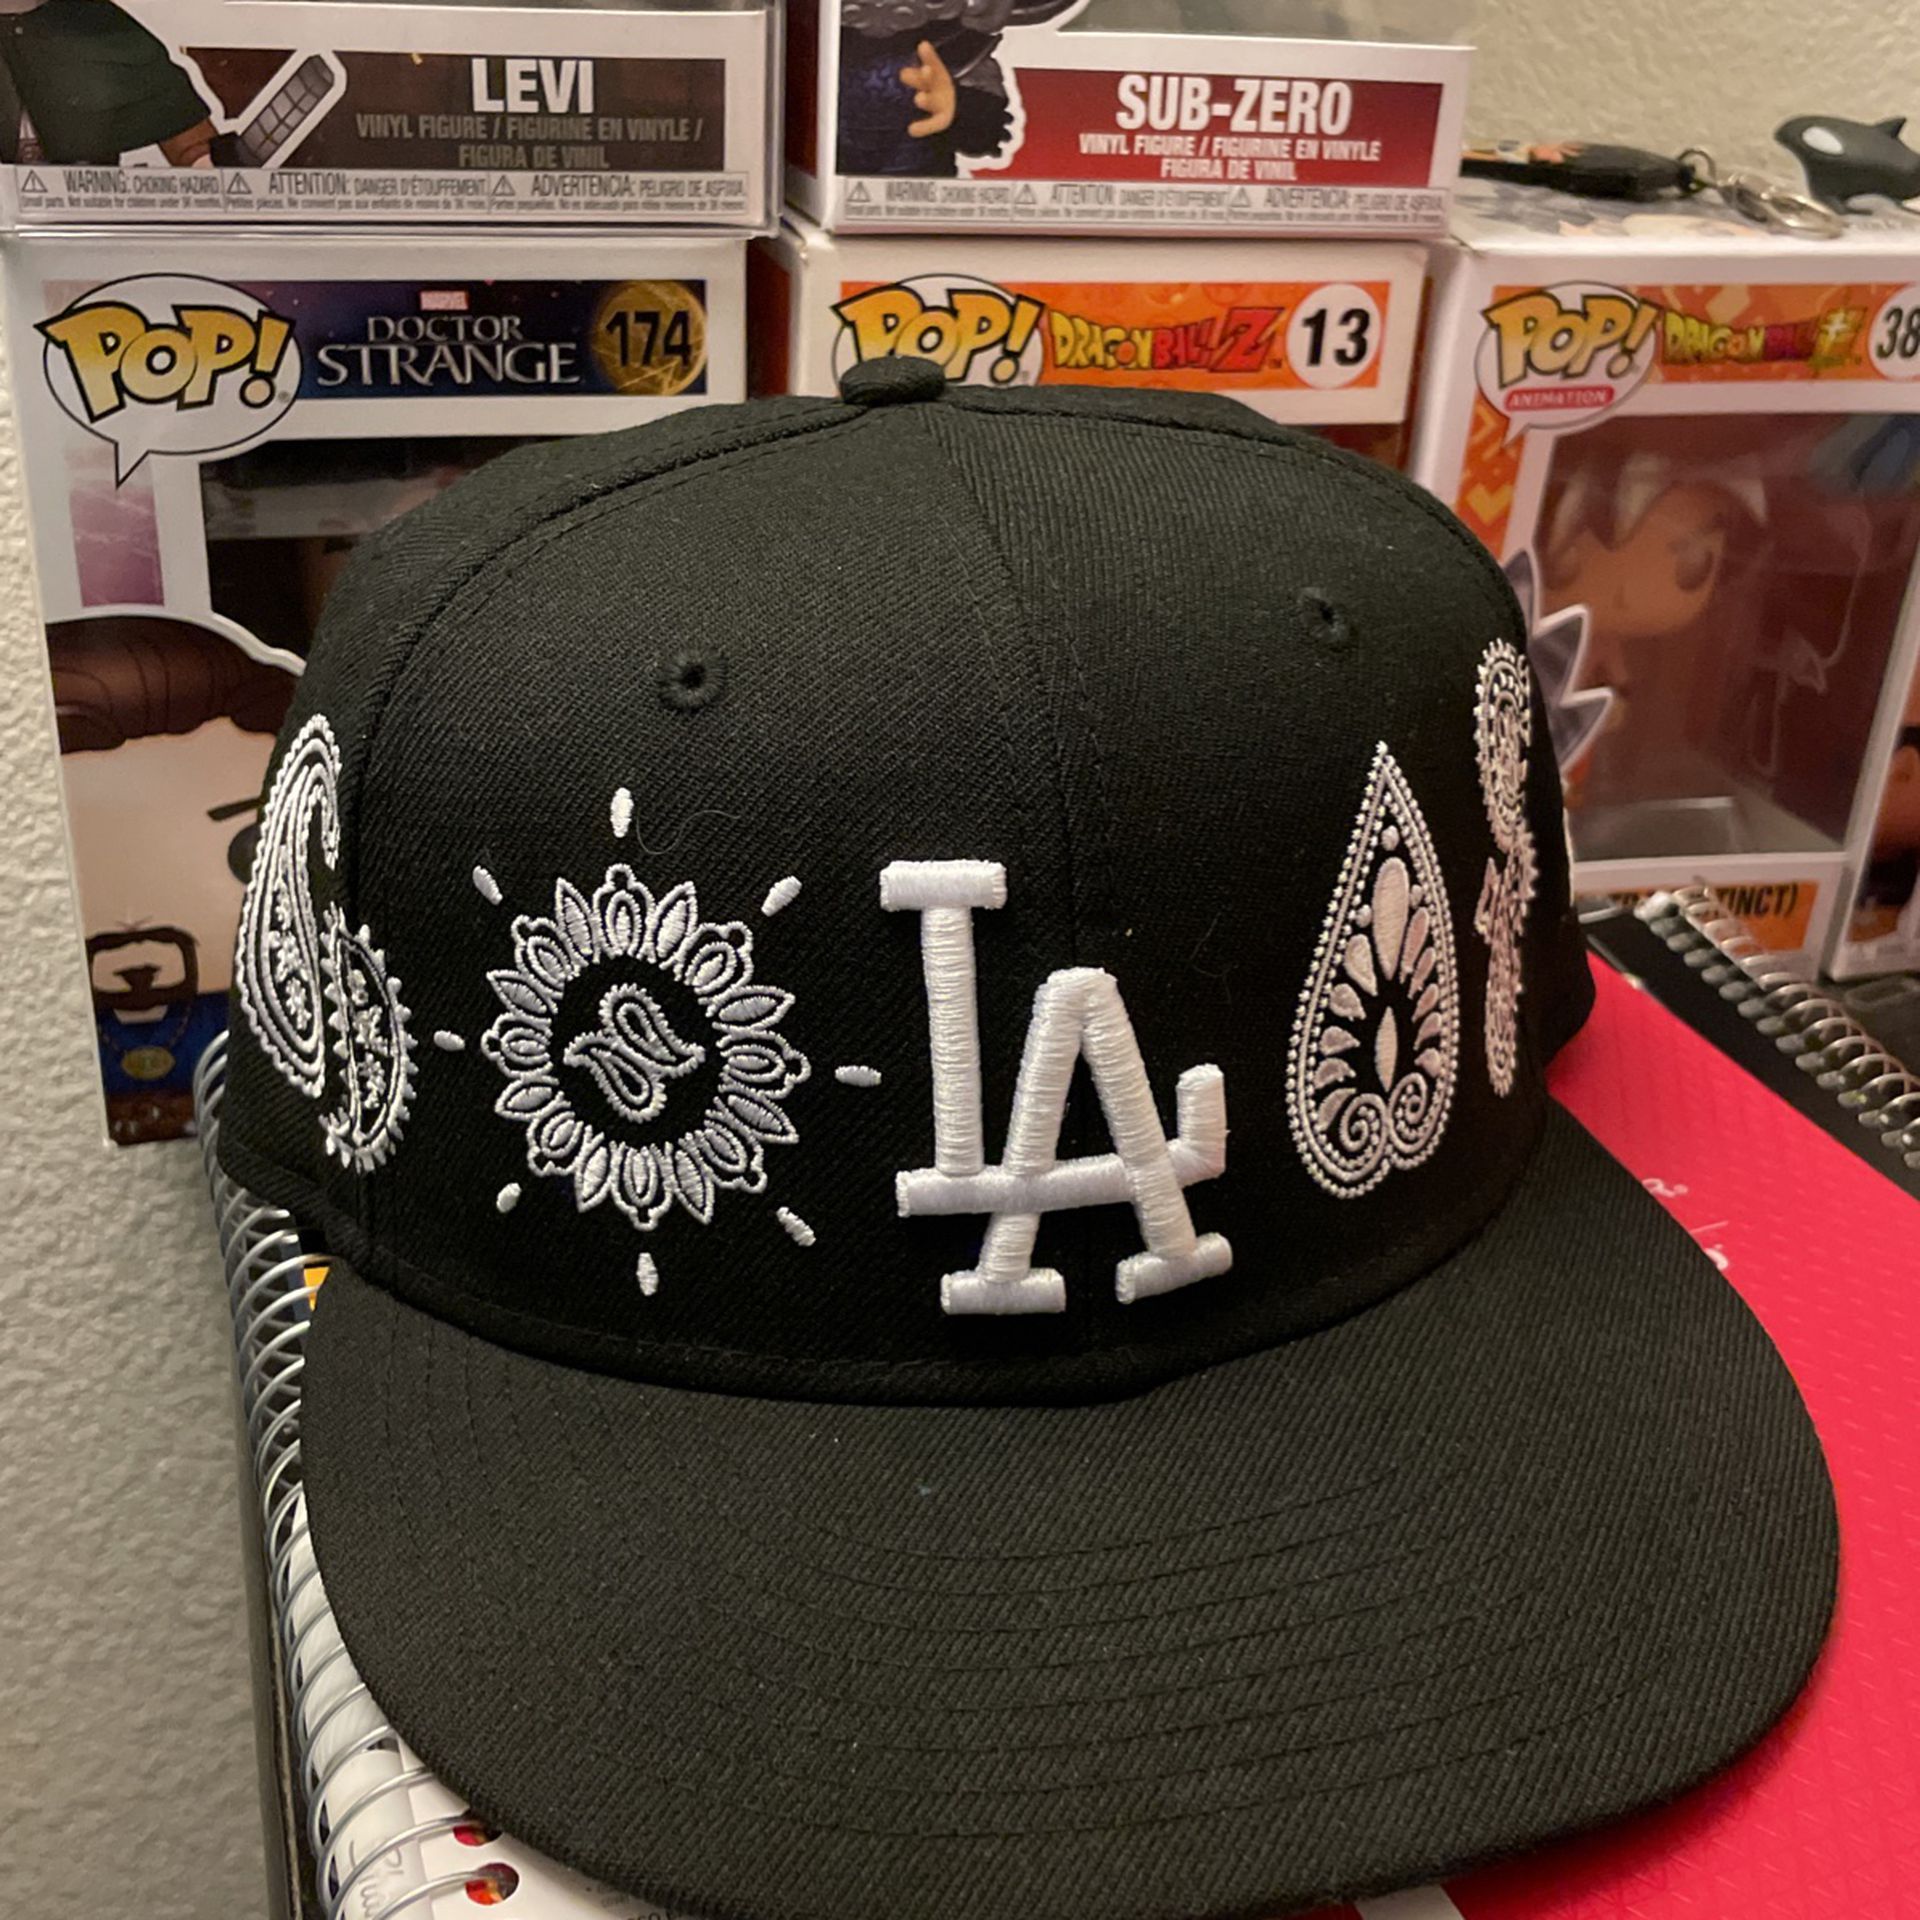 Los Angeles Dodgers Filipino Night special event game baseball hat for Sale  in Cerritos, CA - OfferUp